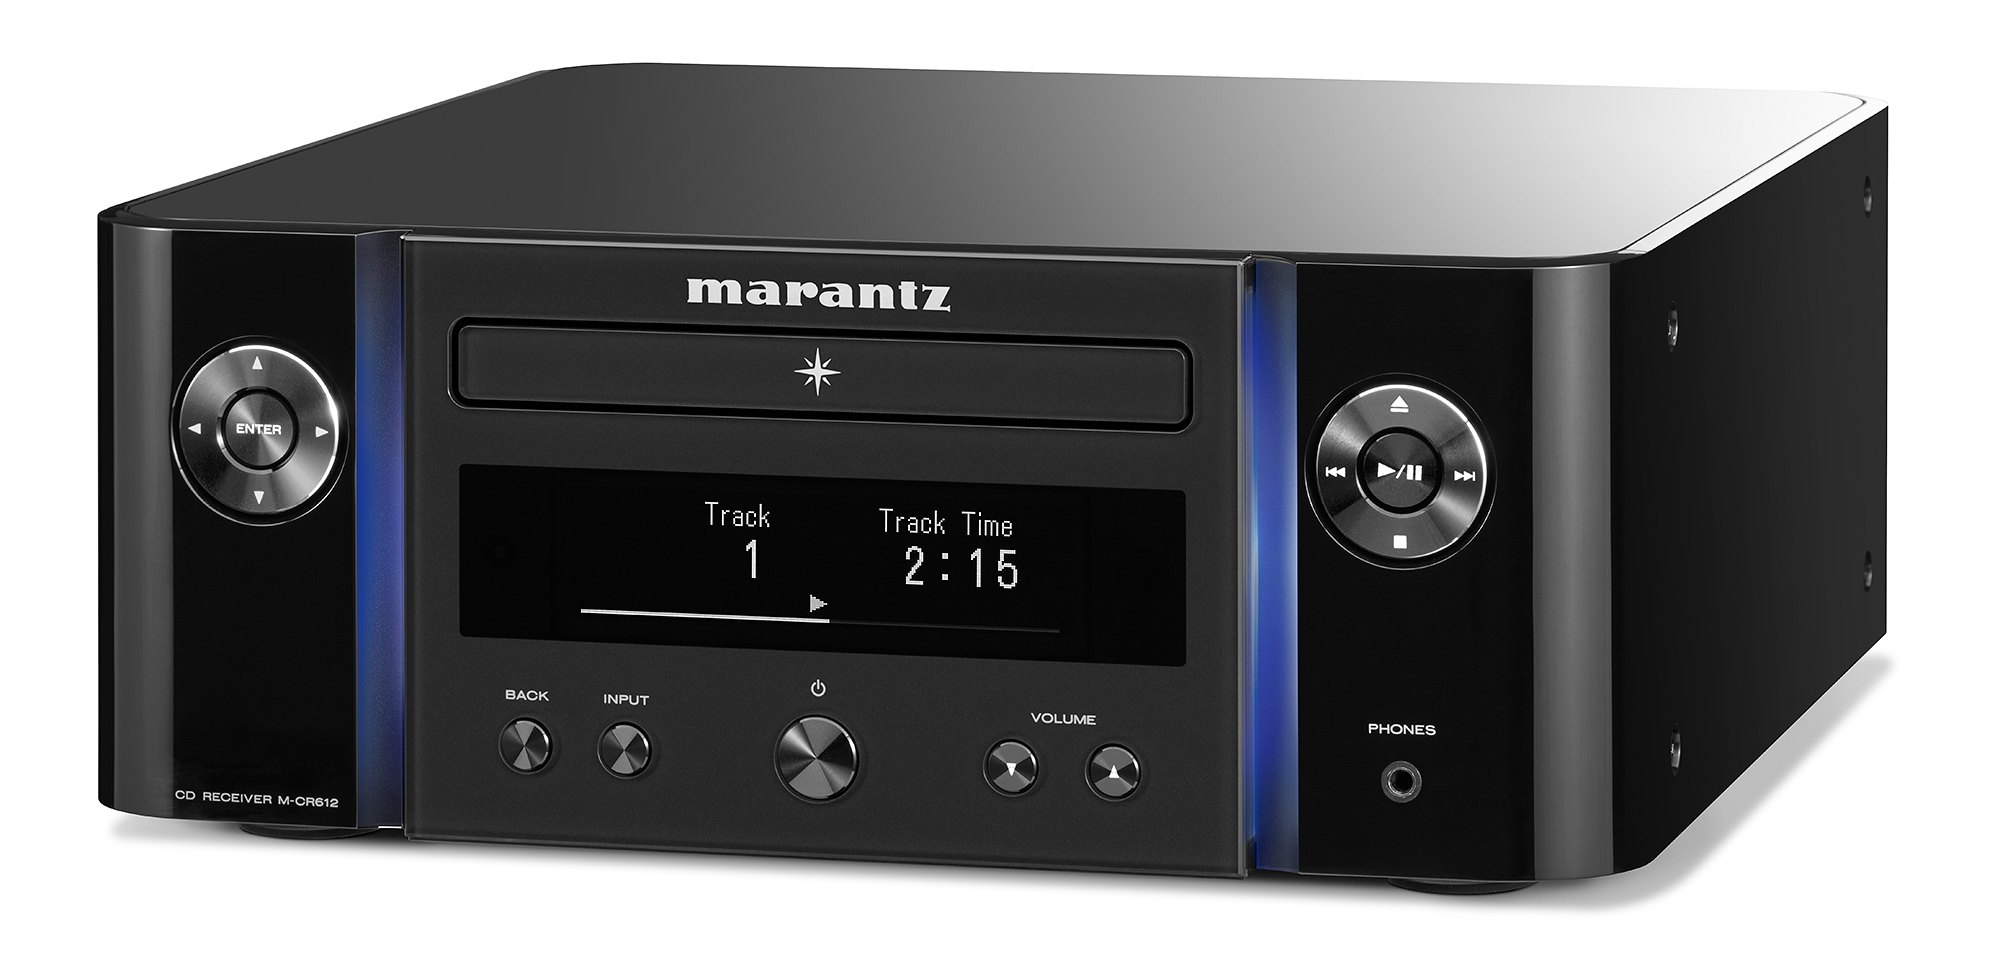 Marantz M-Cr612 Stereo amplifier and CD player